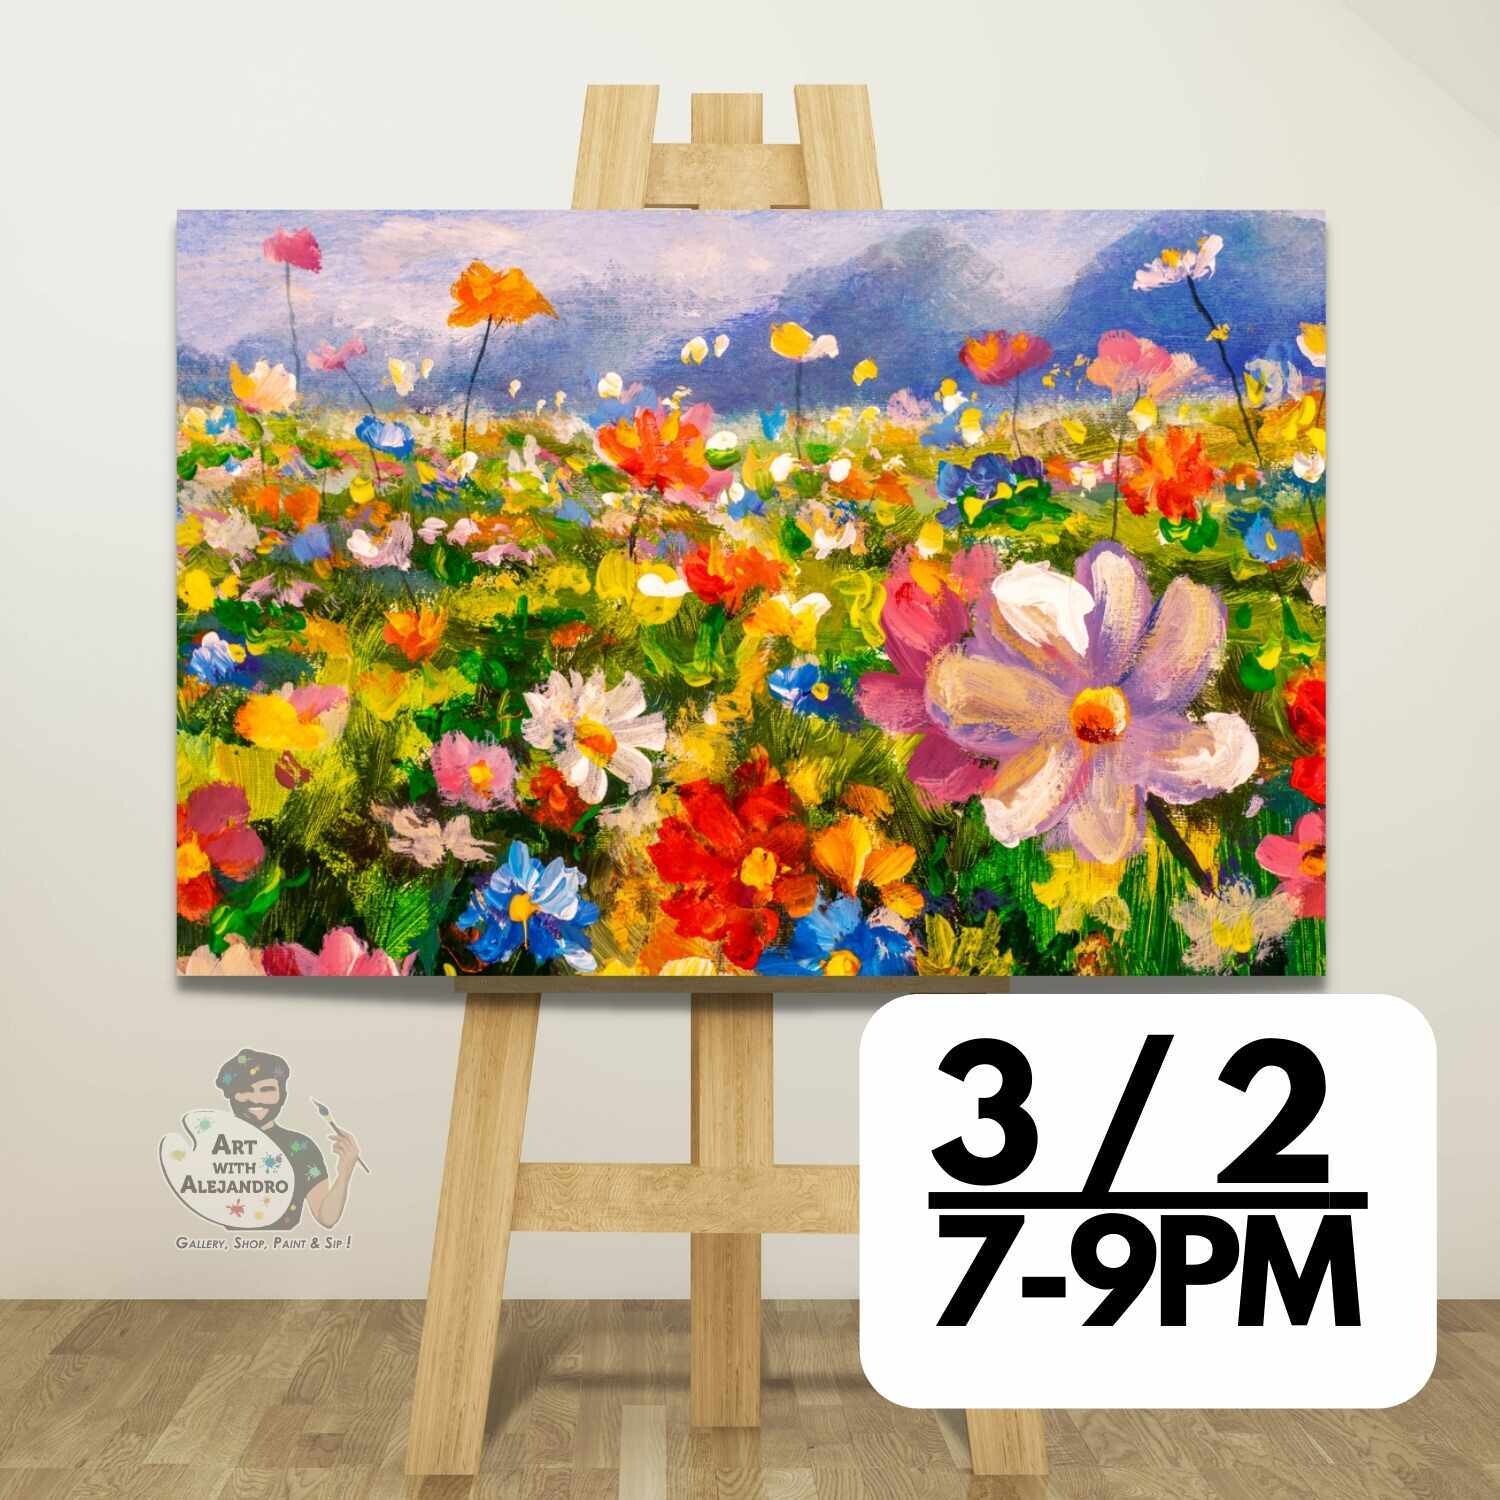 Wildflowers - Thurs March 2 @ 7:00-9:00 PM